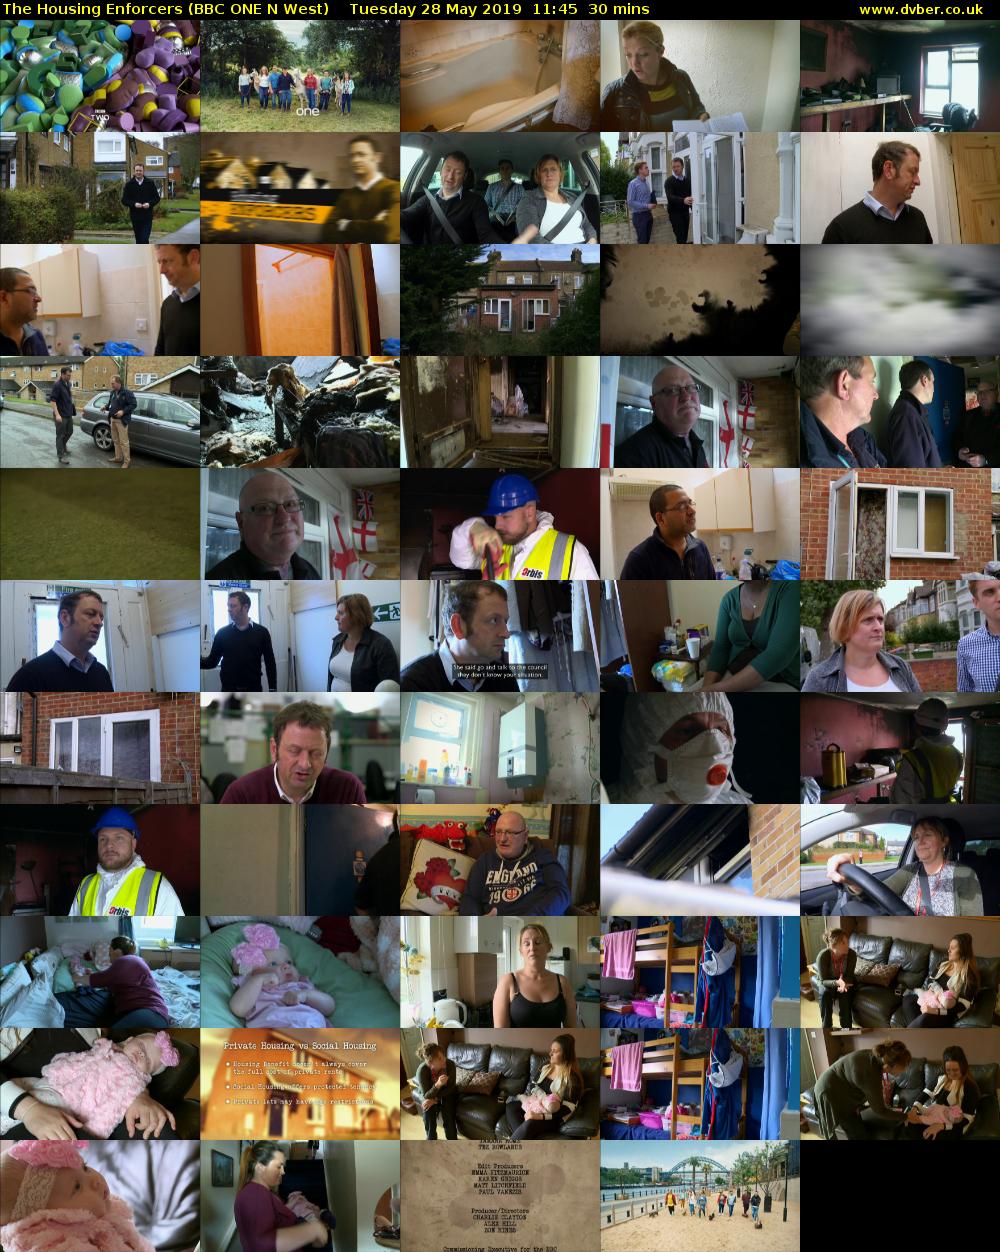 The Housing Enforcers (BBC ONE N West) Tuesday 28 May 2019 11:45 - 12:15